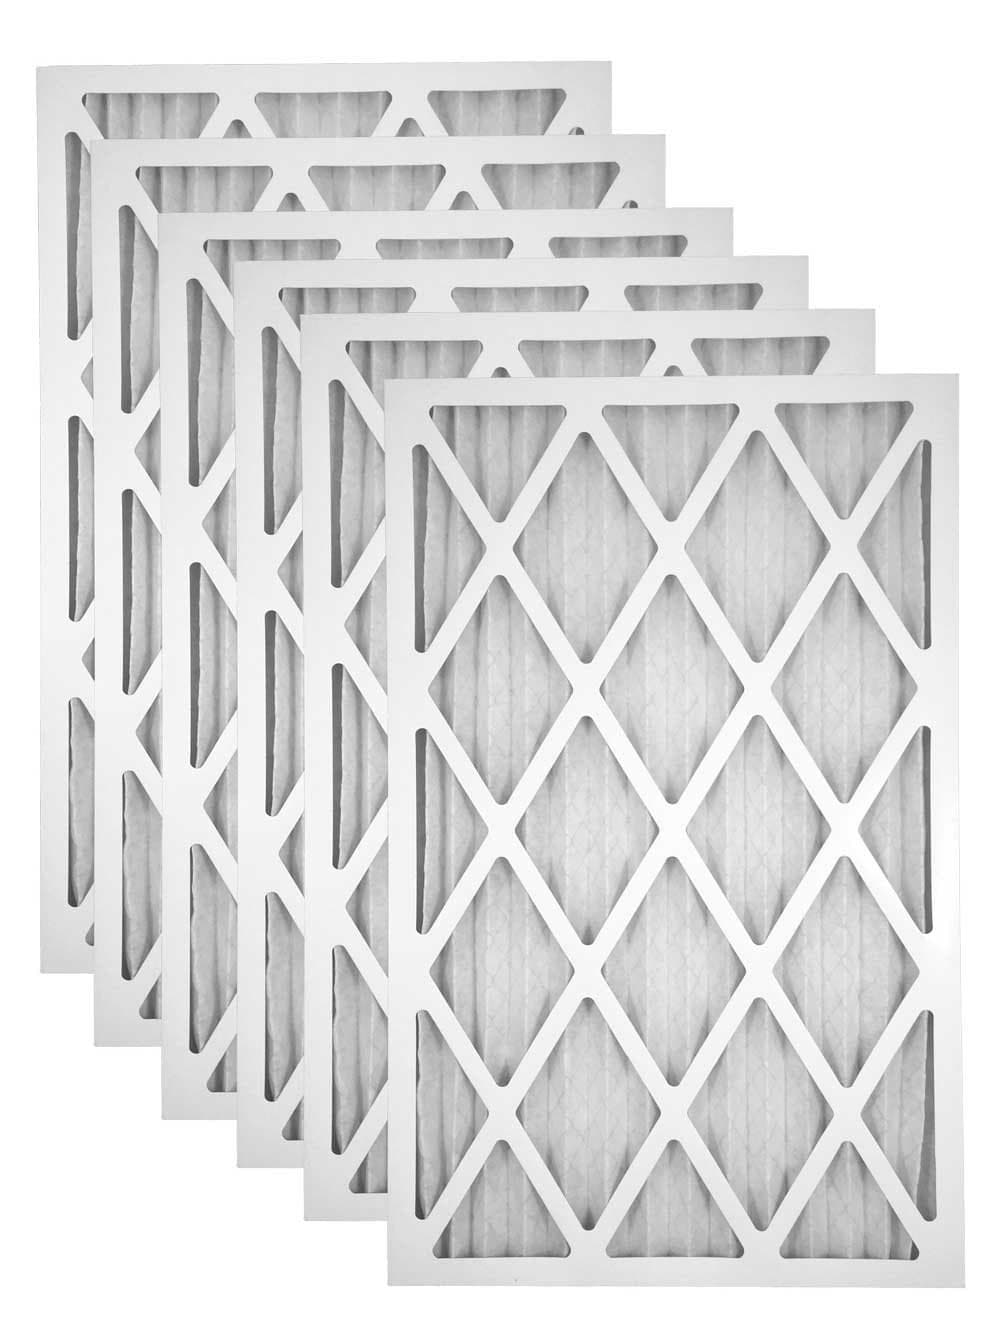 25x25x1 MERV 11 Pleated Geothermal Furnace Filter - Case of 6